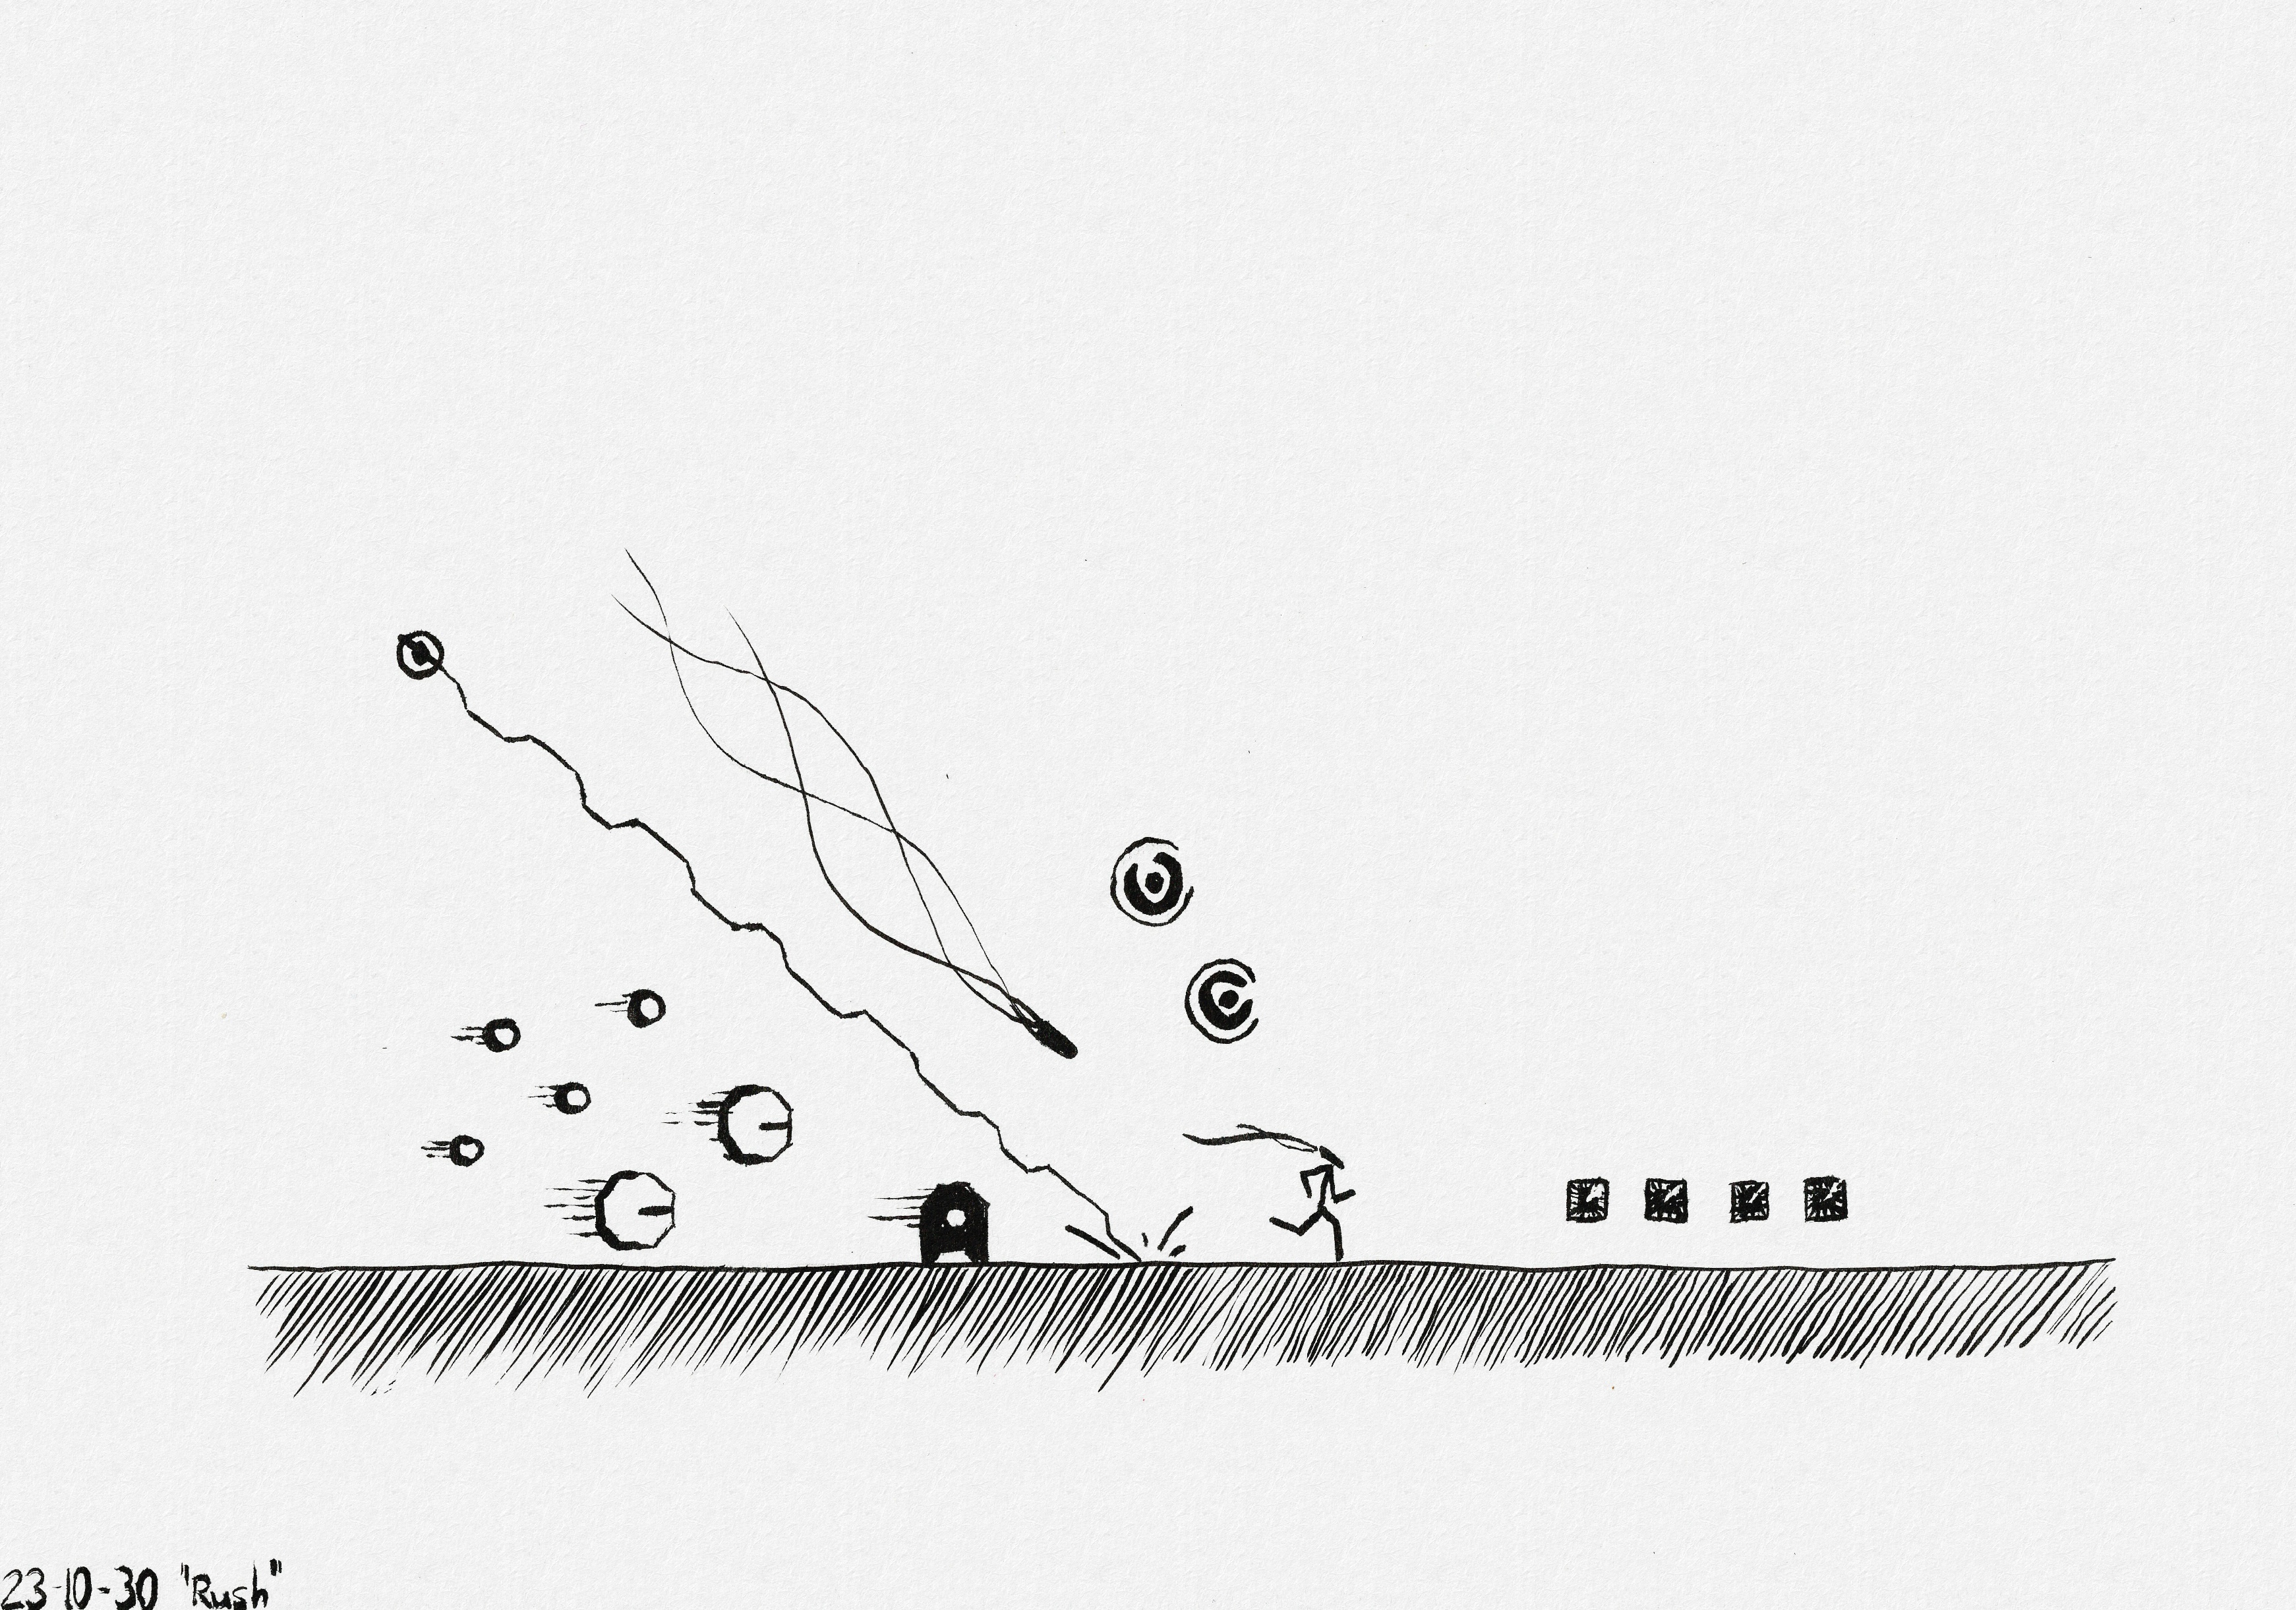 The ninja from N++ running away from a distressingly large collection of enemies.